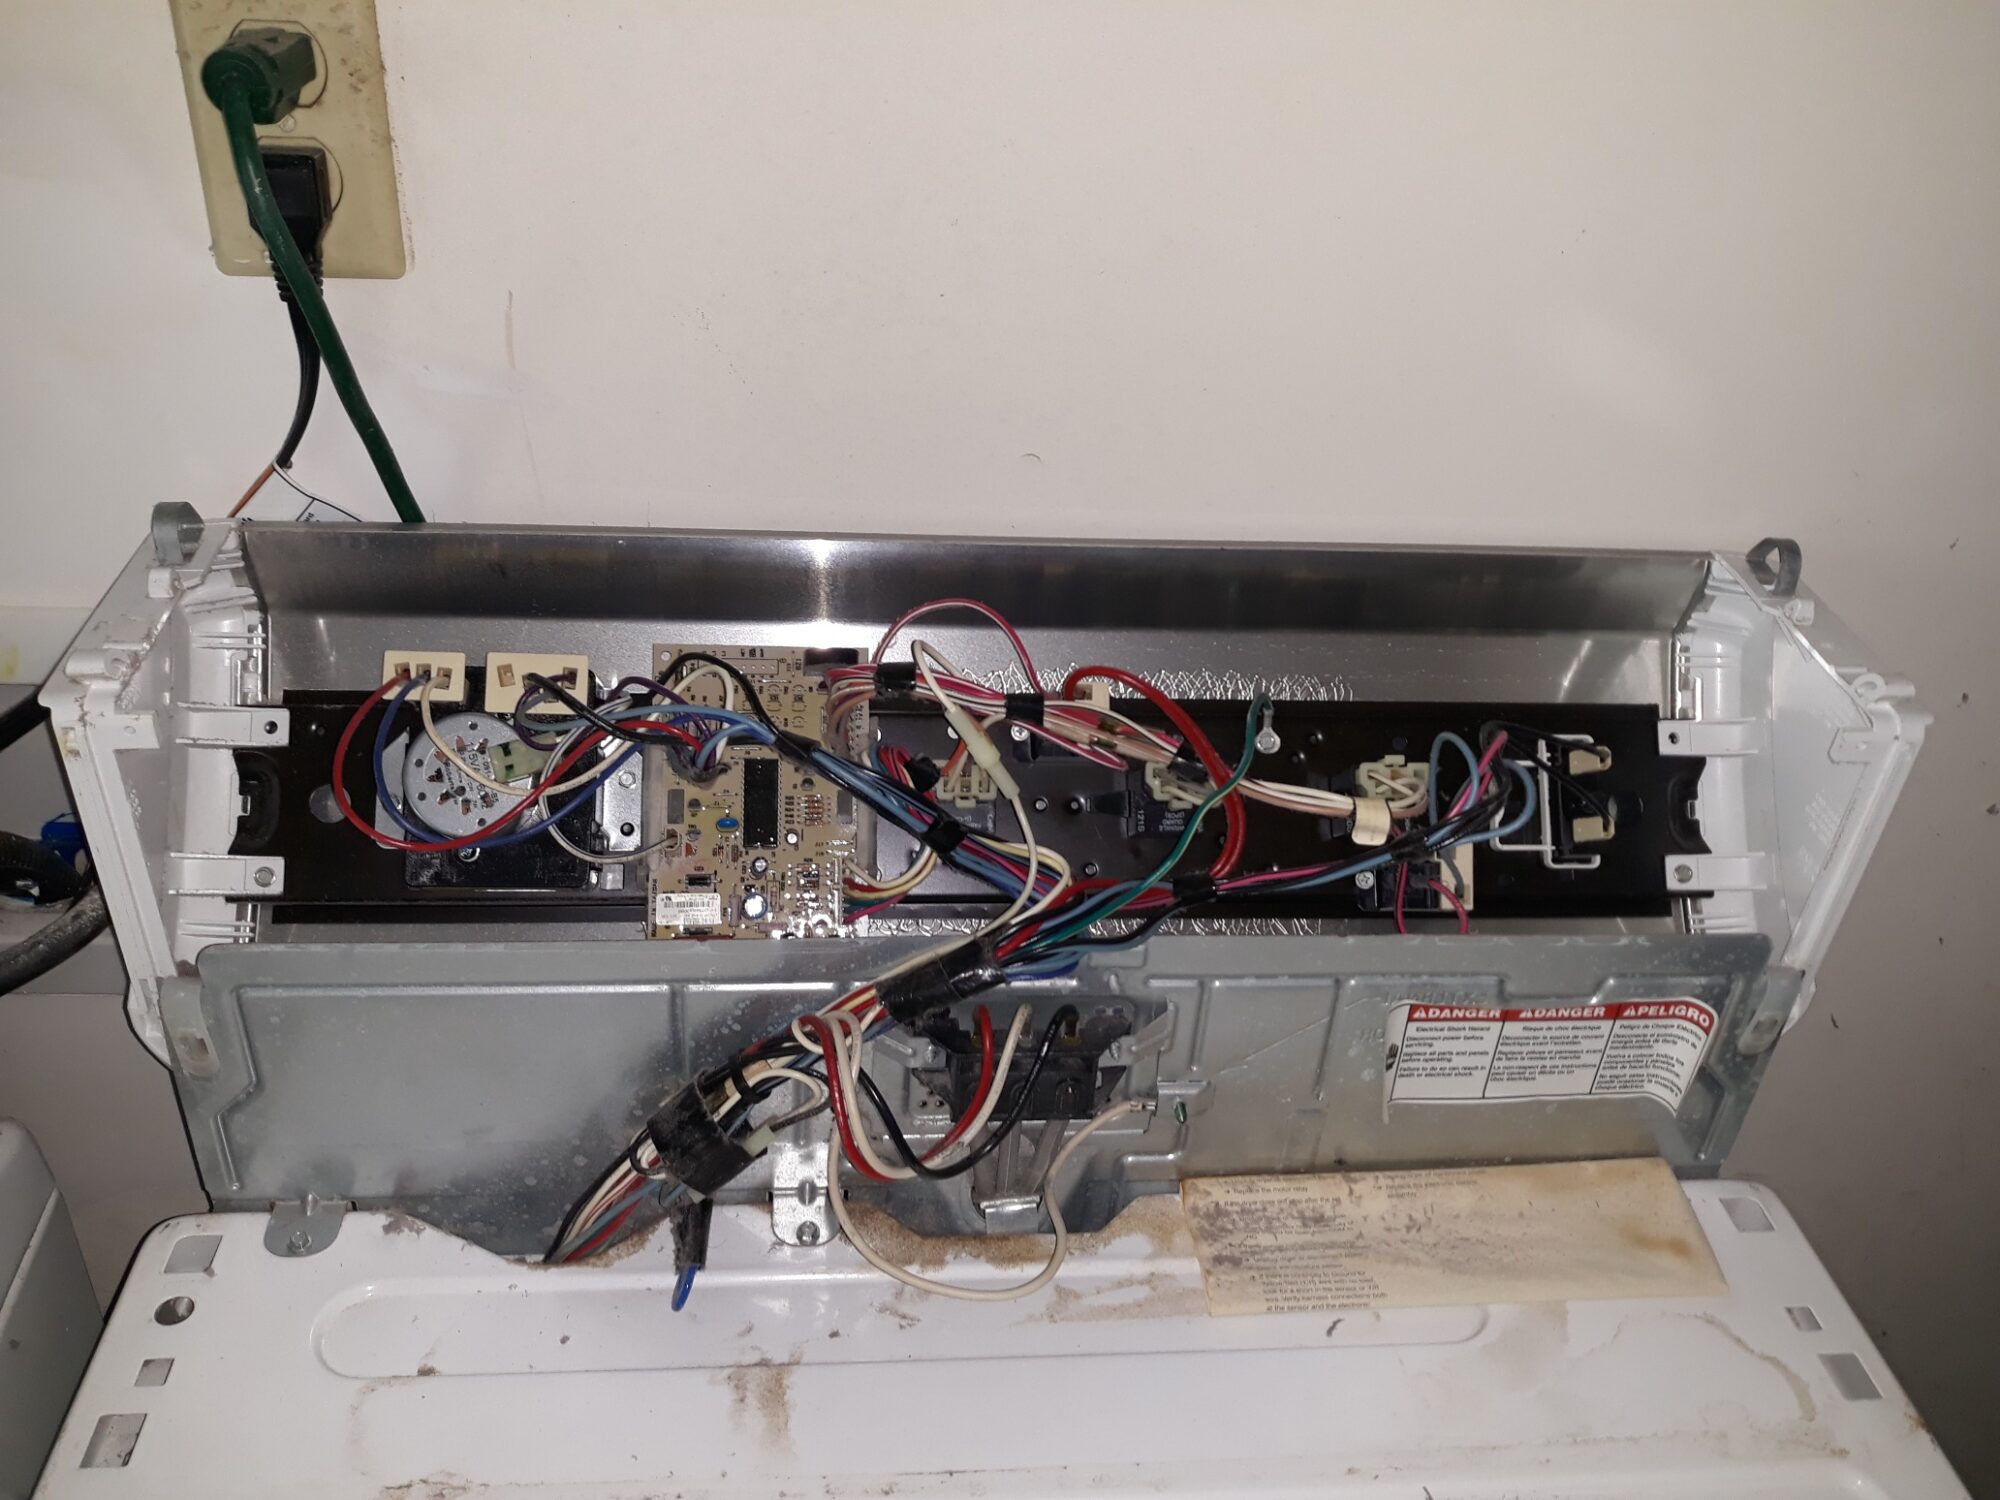 appliance repair dryer repair repair required replacement of the failed timer with a new part cherry tree st eustis fl 32726